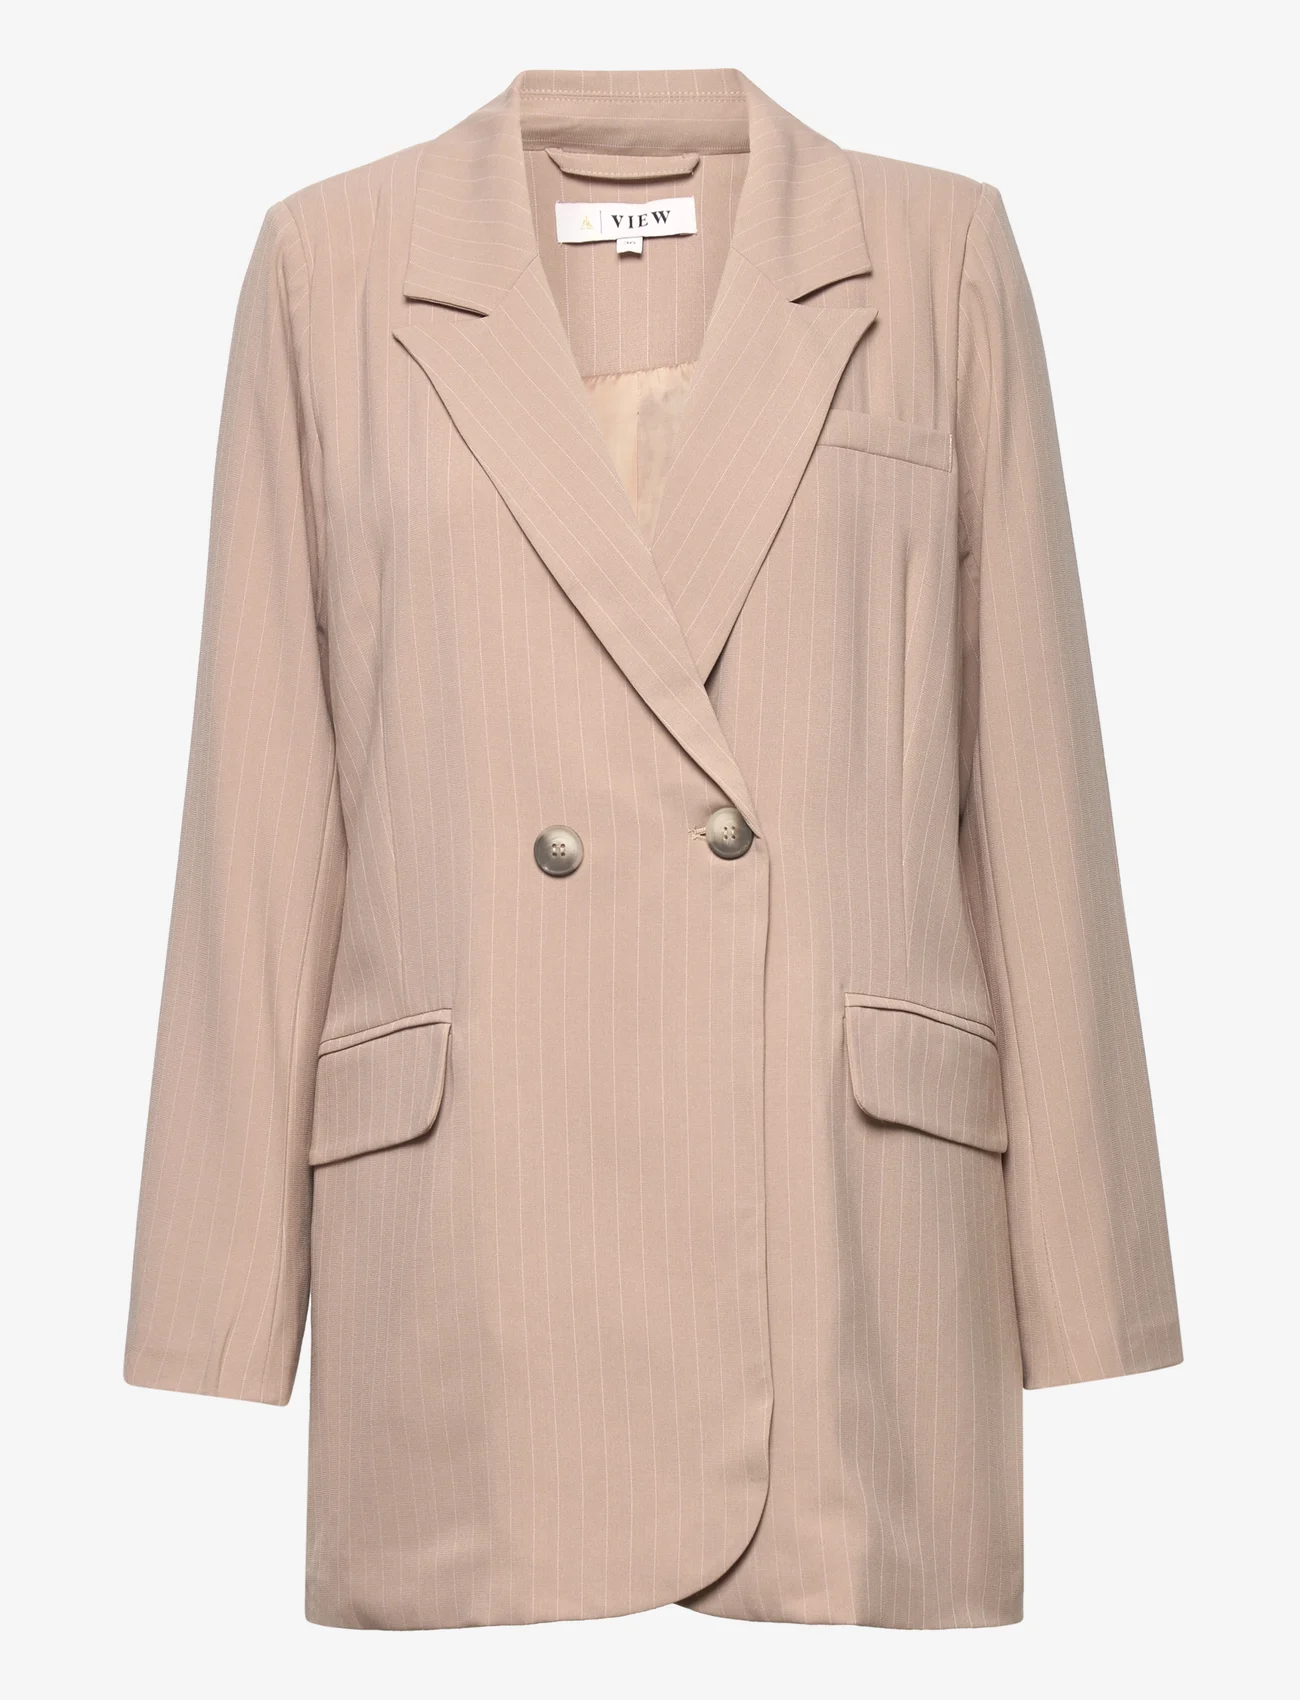 A-View - Annali camel stripe blazer - party wear at outlet prices - camel - 0